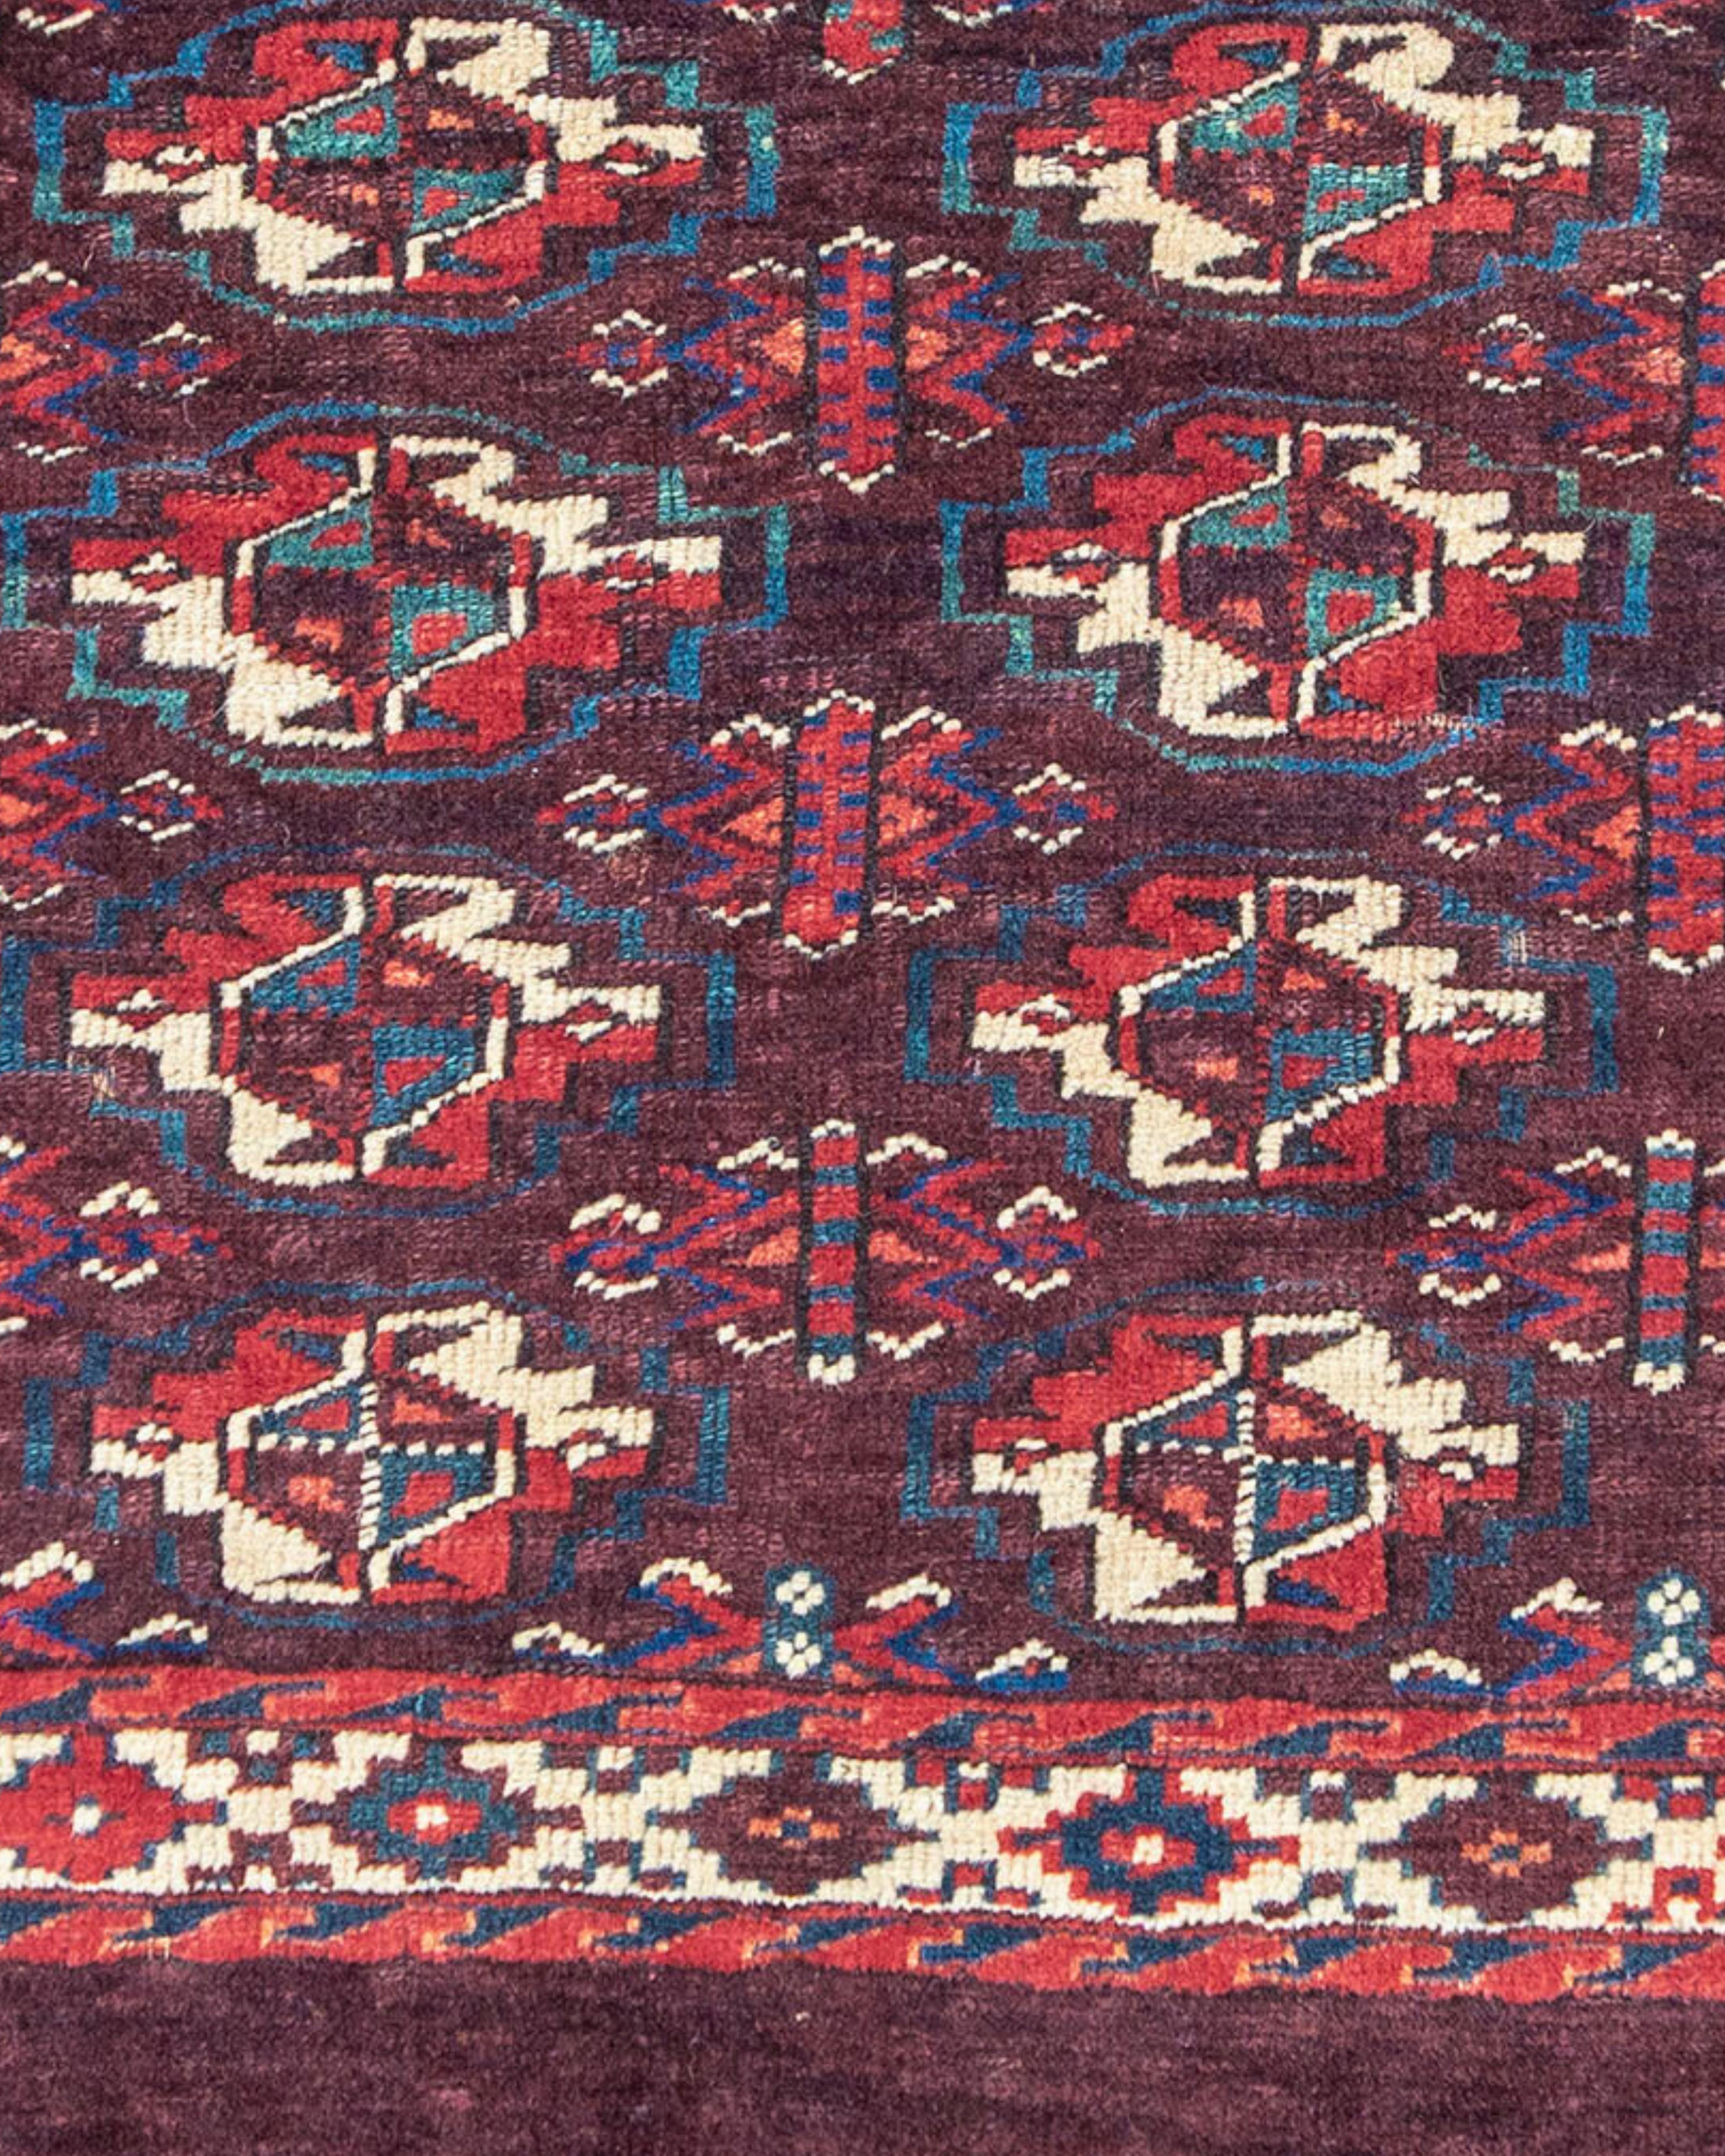 Antique Turkmen Yomut Chuval Rug Mat, 19th Century

Additional Information:
Dimensions: 1'10